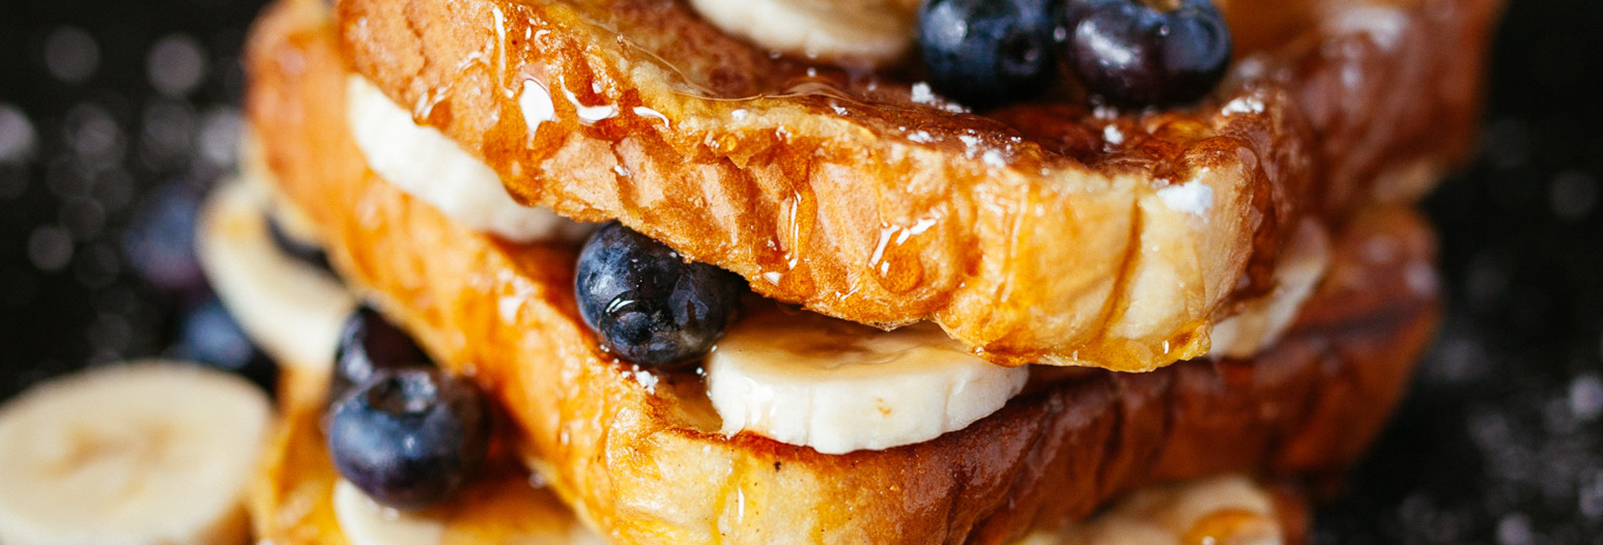 a stack of french toast, blueberries, and bananas